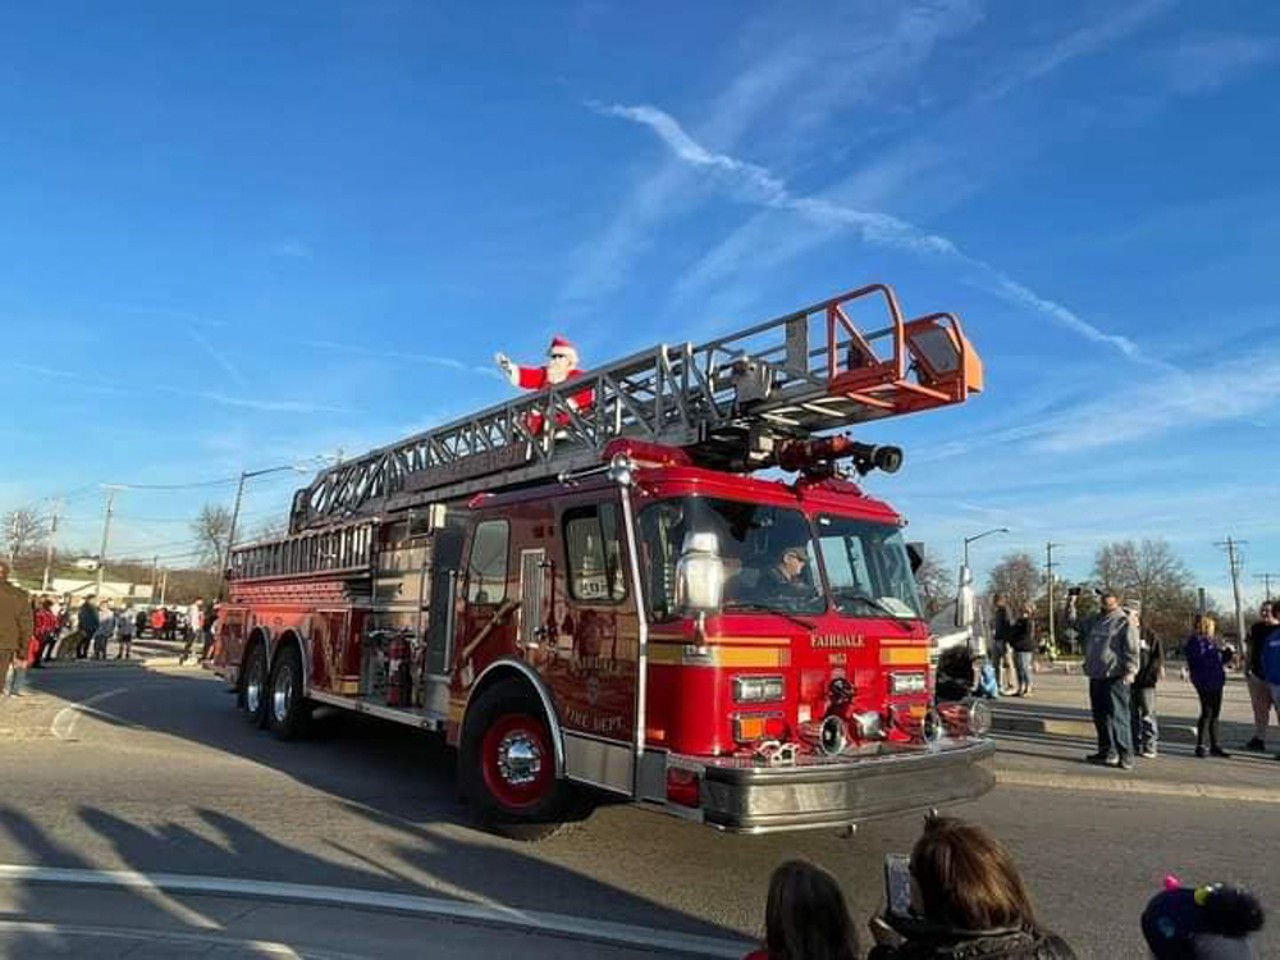  Light Up Fairdale Festival & Parade 2022
10714 W. Manslick Rd.  
Saturday, Dec. 3, 9 a.m. - 7 p.m. (approx.), parade lineup ends at 3:15 p.m., parade starts at 4 p.m., tree lighting countdown at 5:45 
Watch (or take part in) the parade, meet Santa, ride a kid-sized train, eat cookies, sing carols, and learn about the original Christmas story.
Photo via facebook.com/Christmasinfairdale